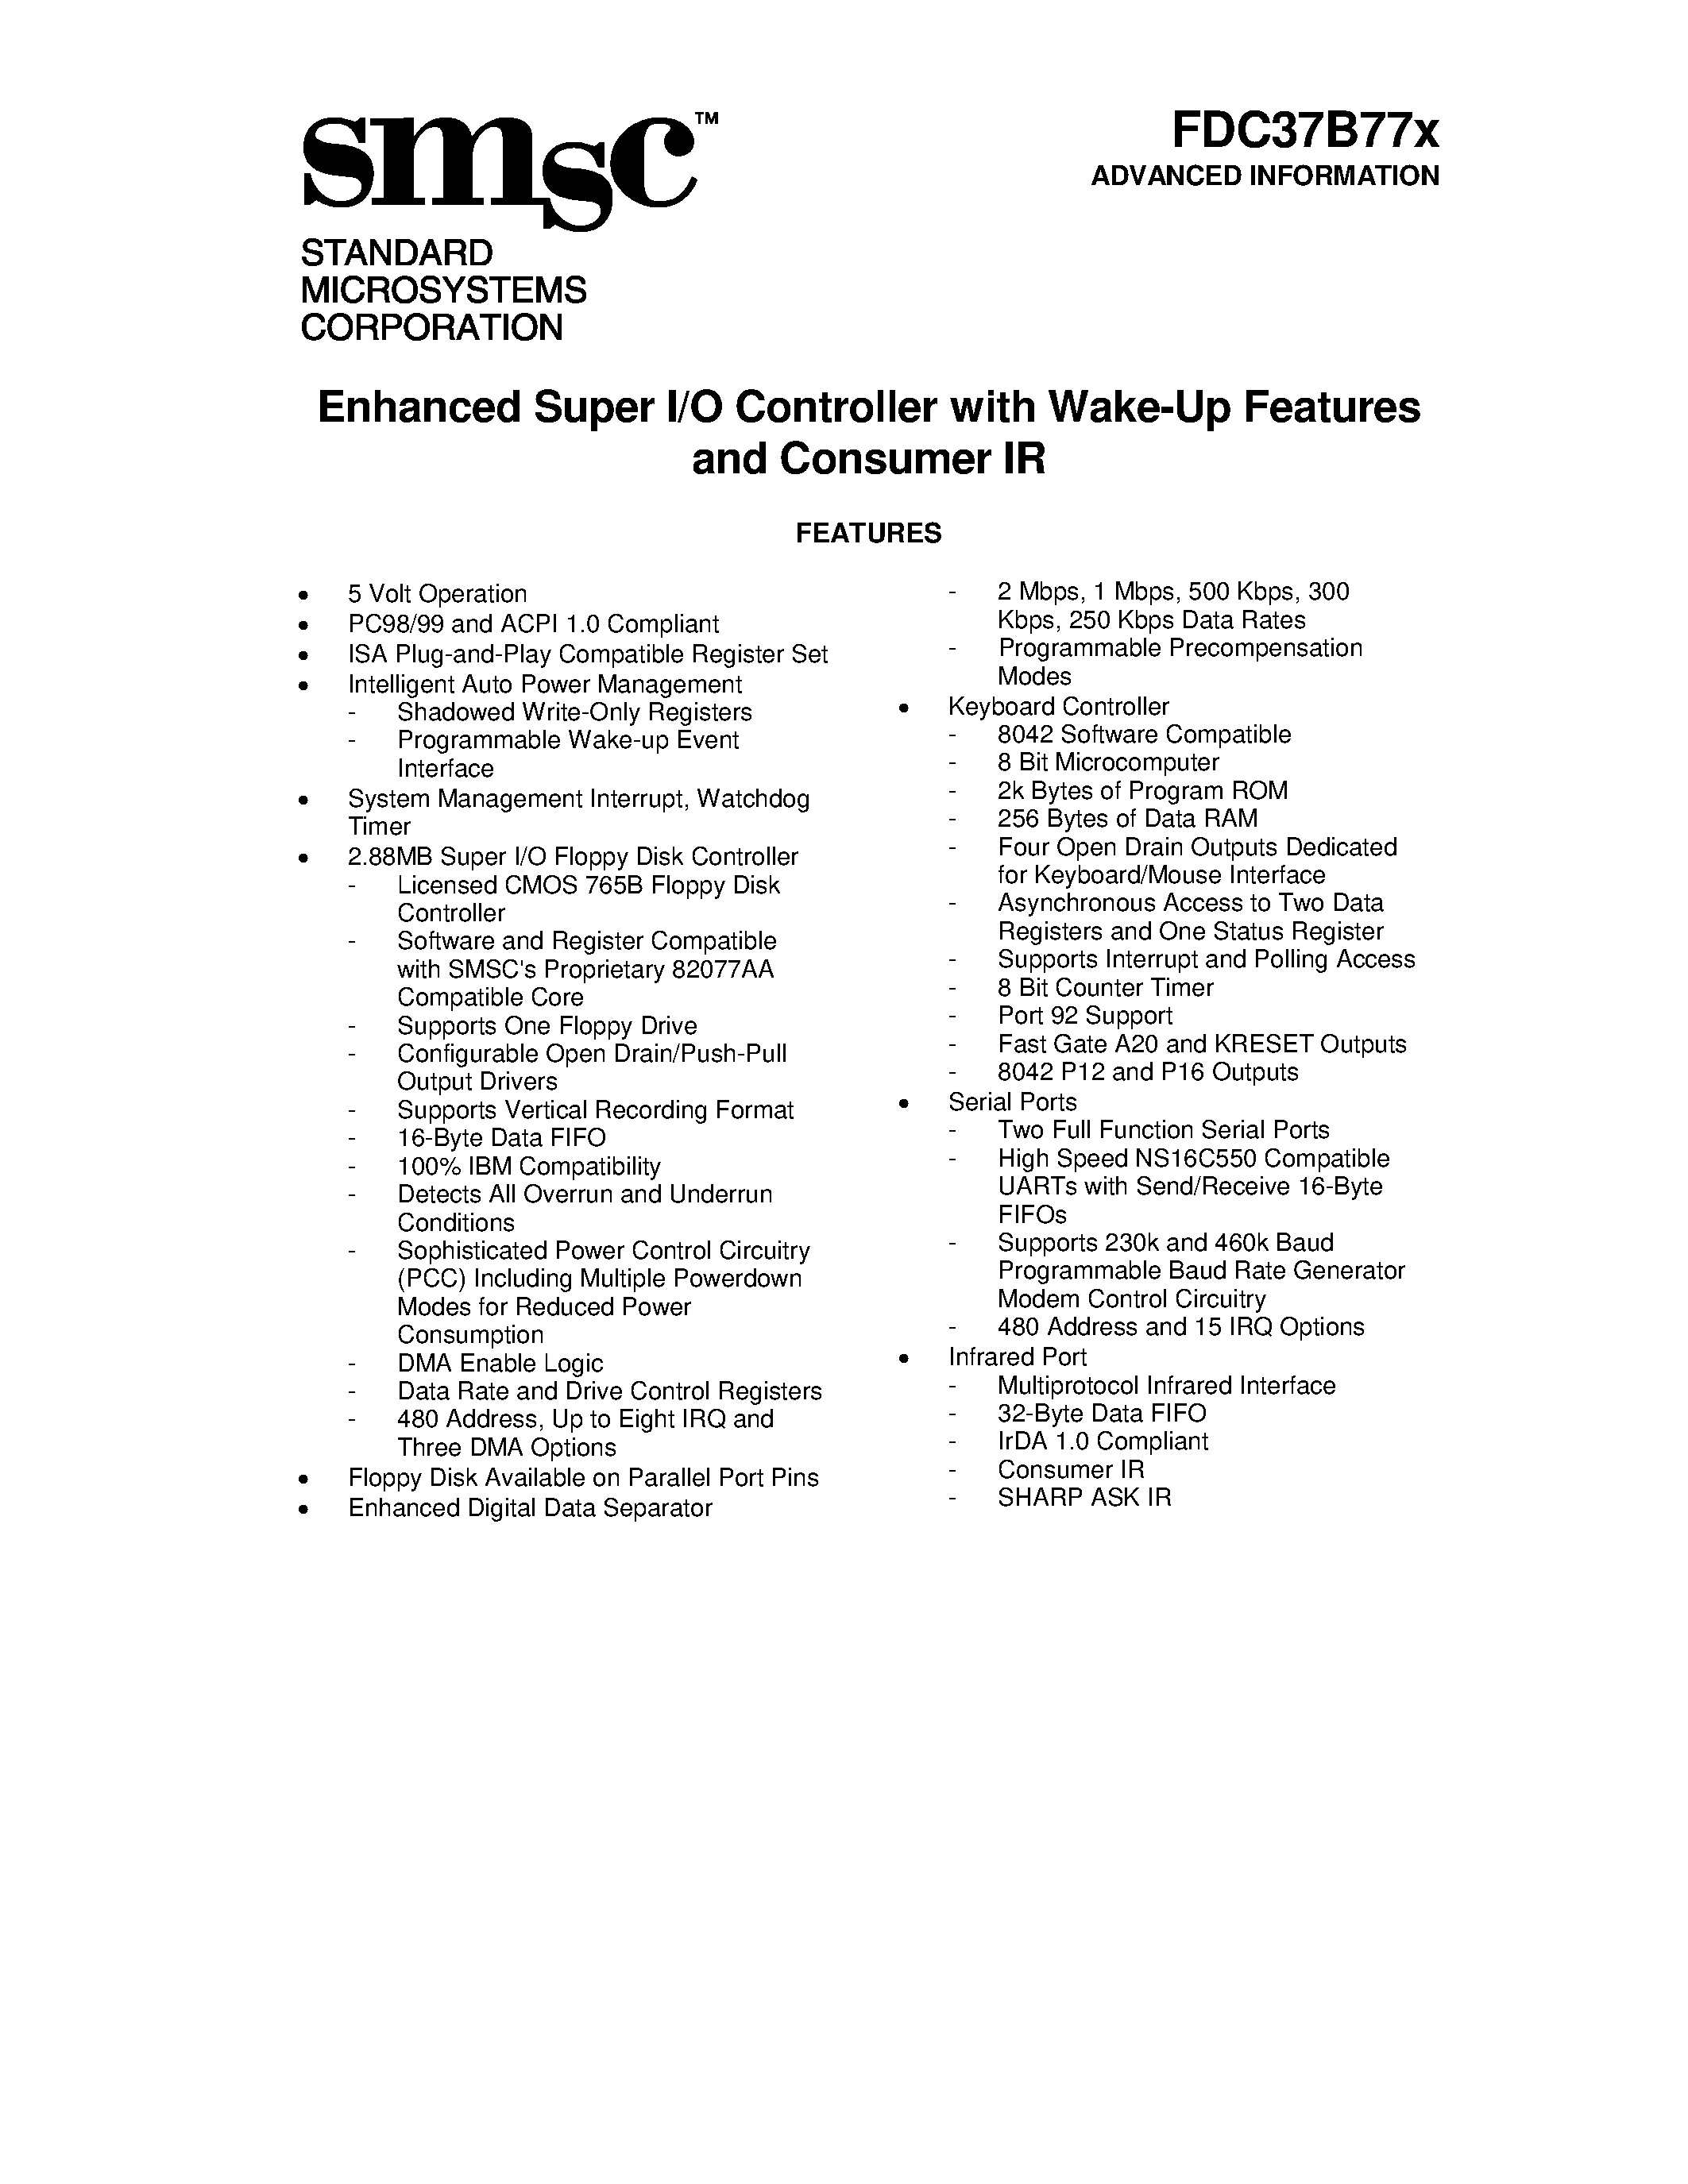 Datasheet FDC37B77X - ENHANCED SUPER I/O CONTROLLER WITH WAKE UP FEATURES page 1